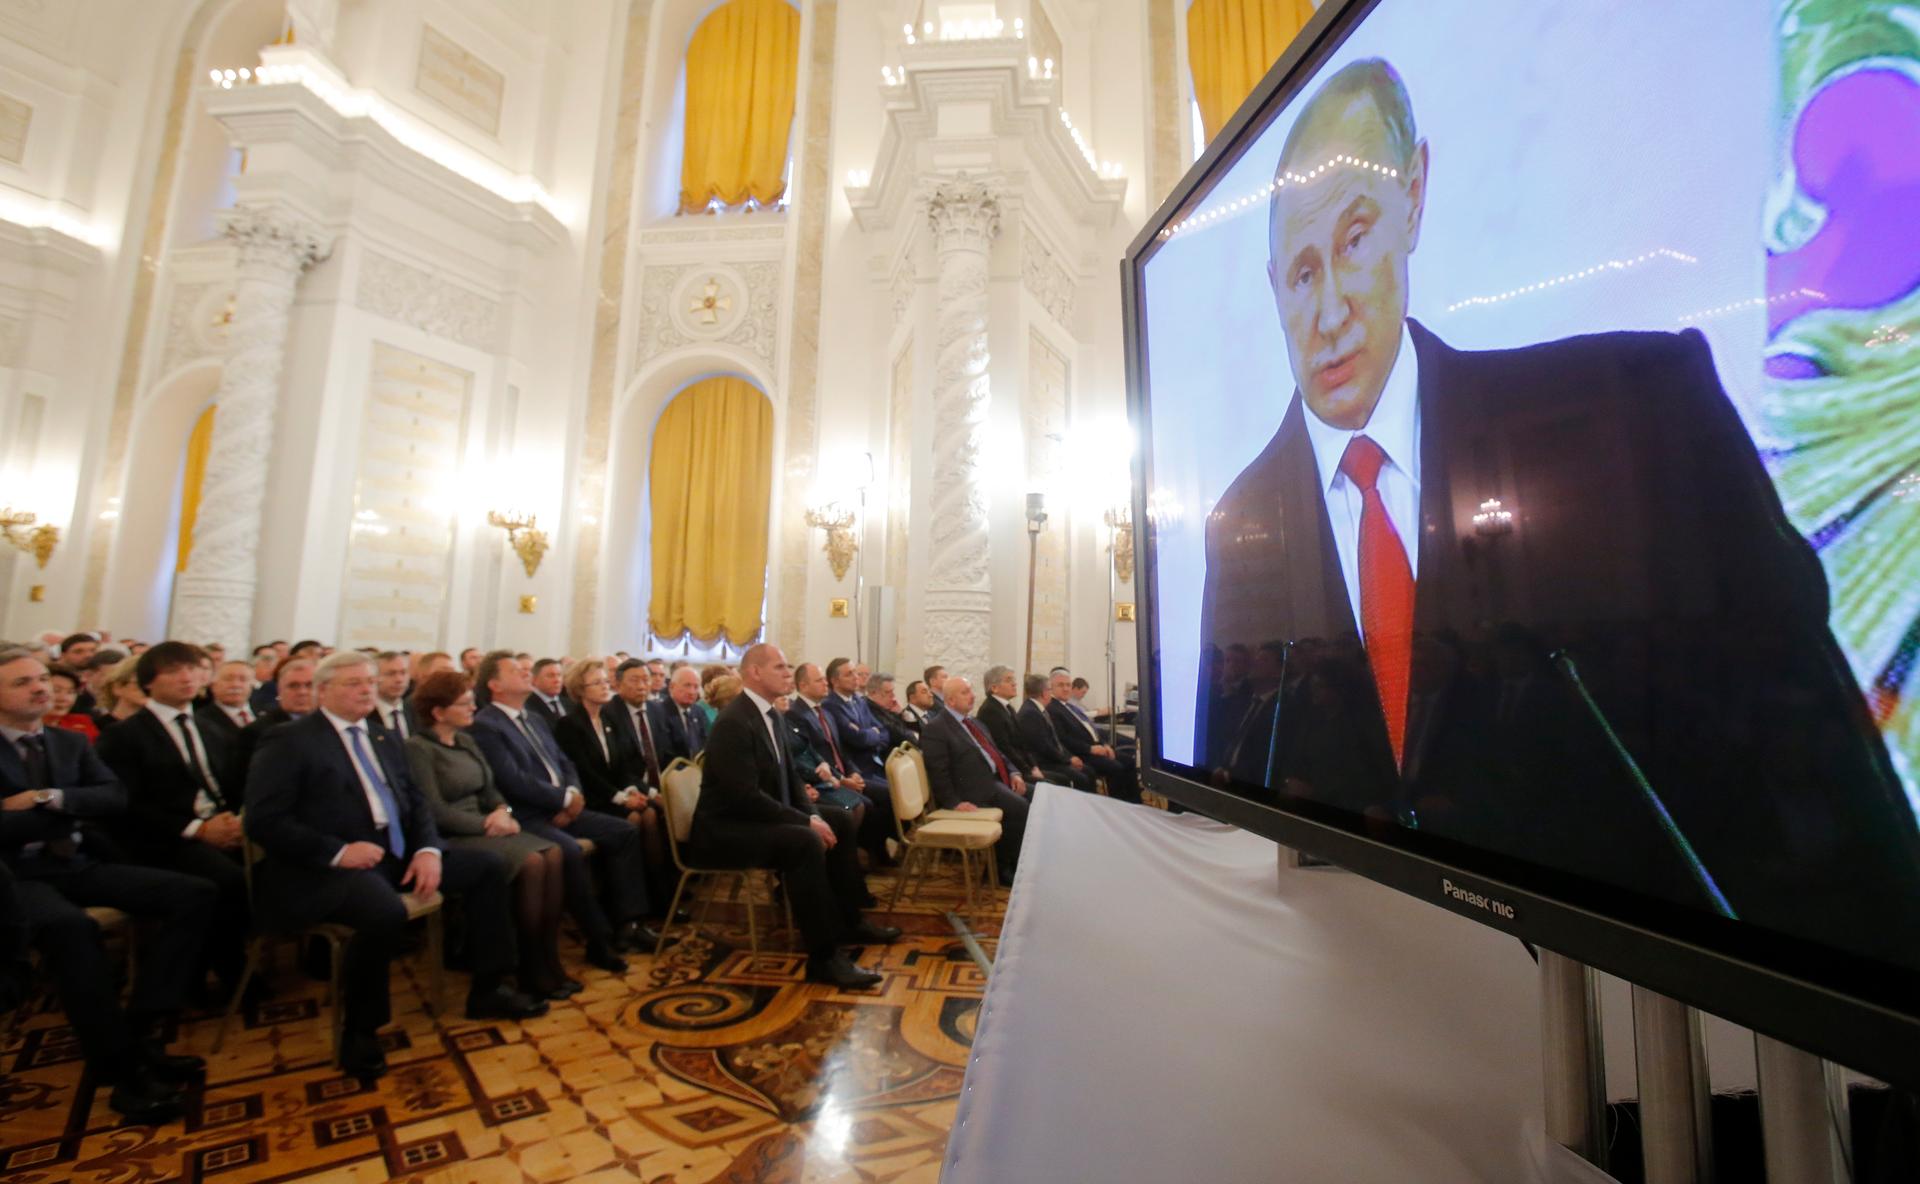 Russian President Vladimir Putin gave his annual state of the nation address at the Kremlin earlier in December.